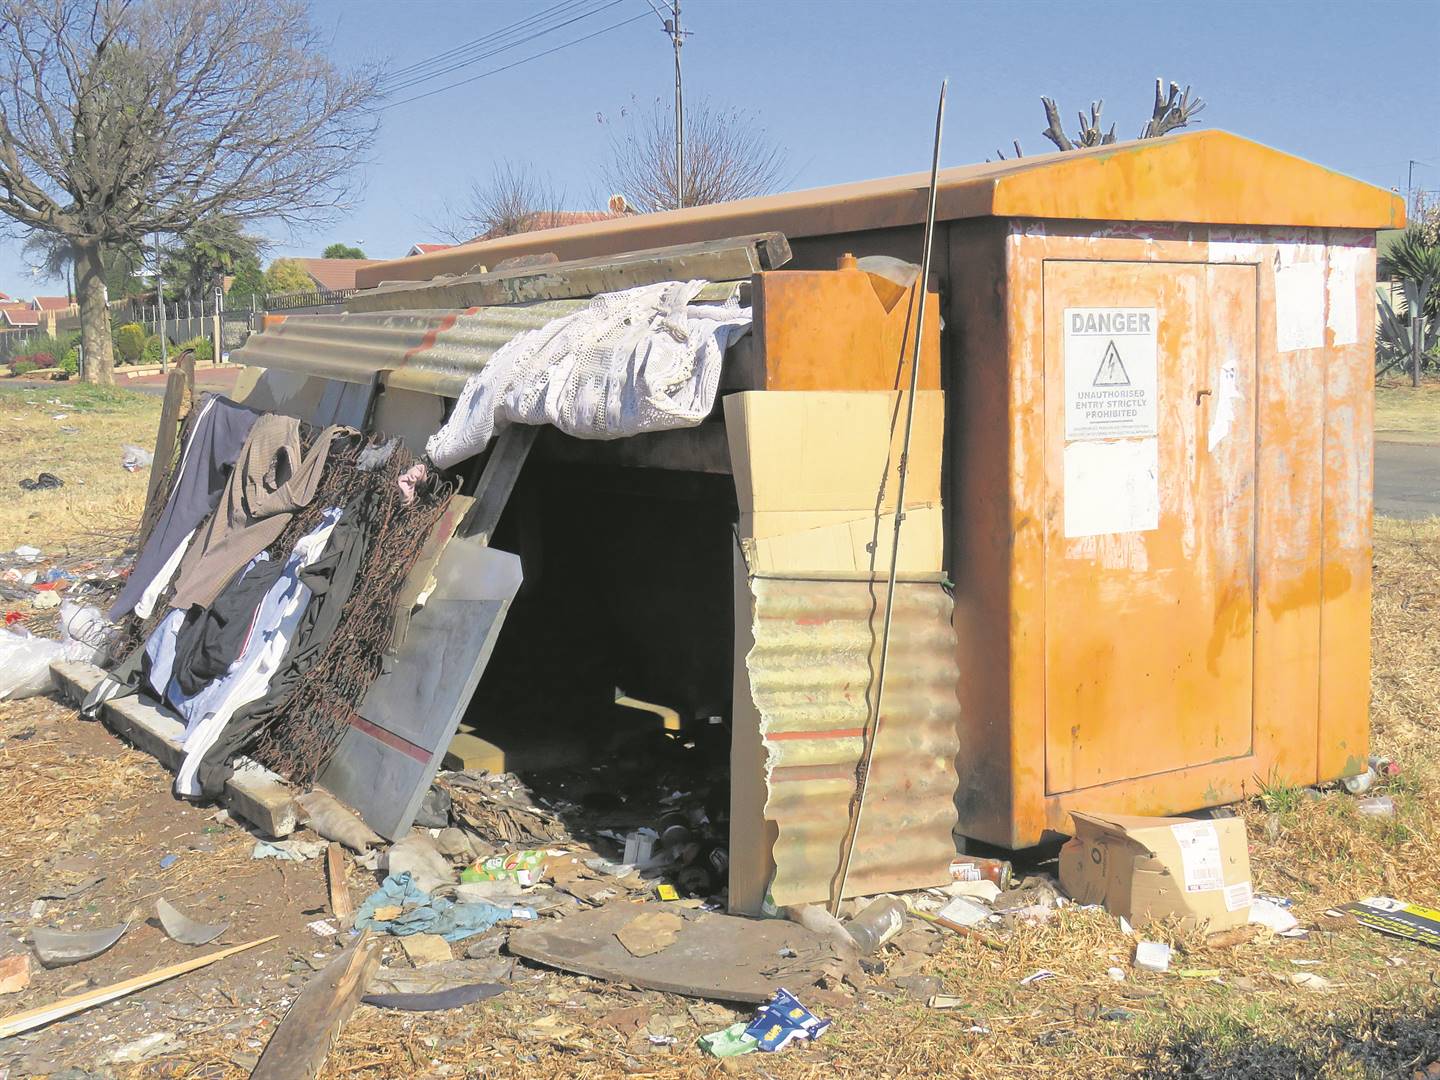 Residents of Bakerton are worried about a homeless man who has made a home next to a transformer.                Photo by Ntebatse Masipa